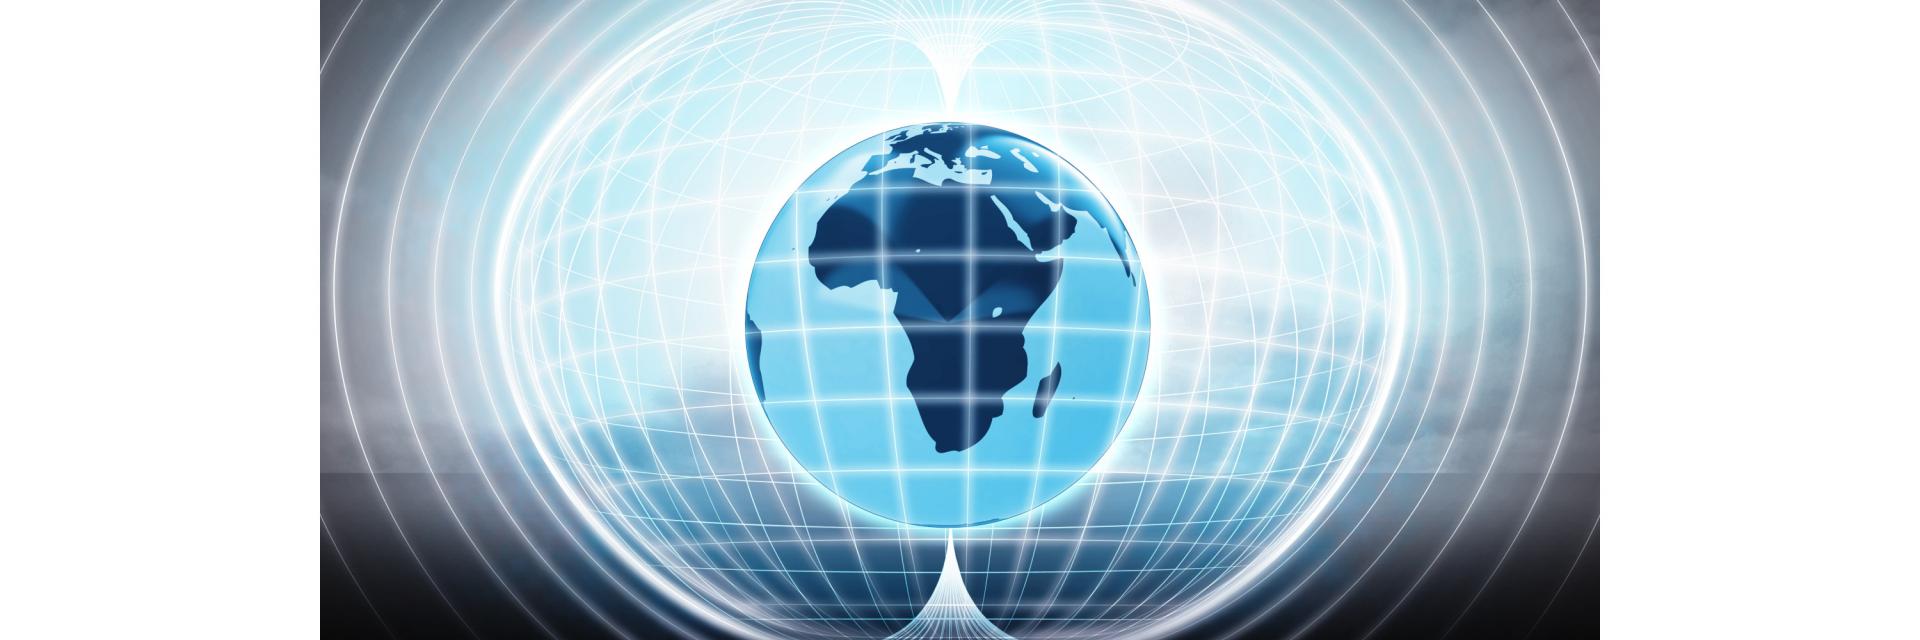 AfCFTA Poised to Revive Economies of Landlocked Developing Countries and Small Island Developing States